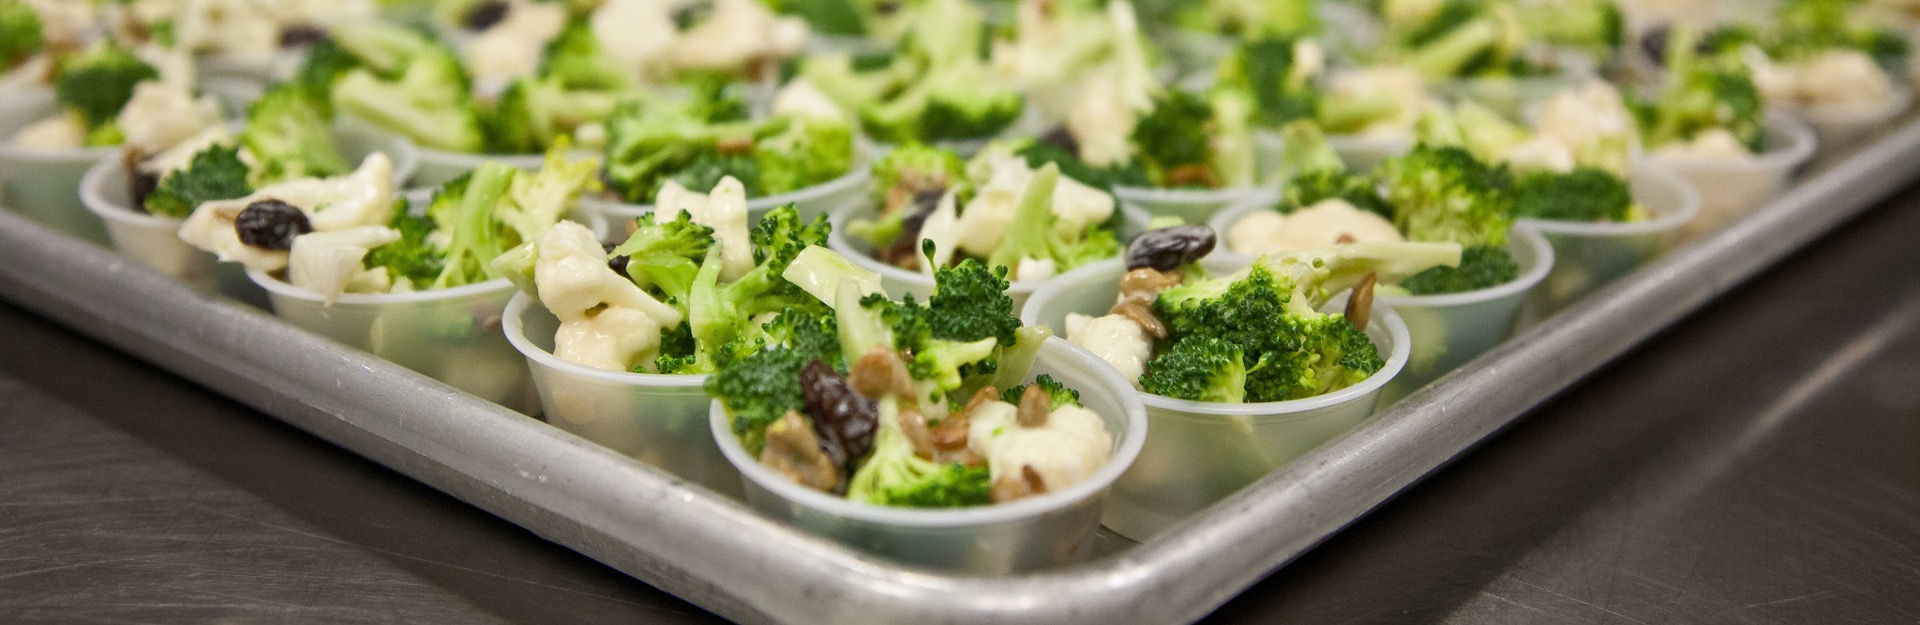 broccoli salad dished into sample size serving cups